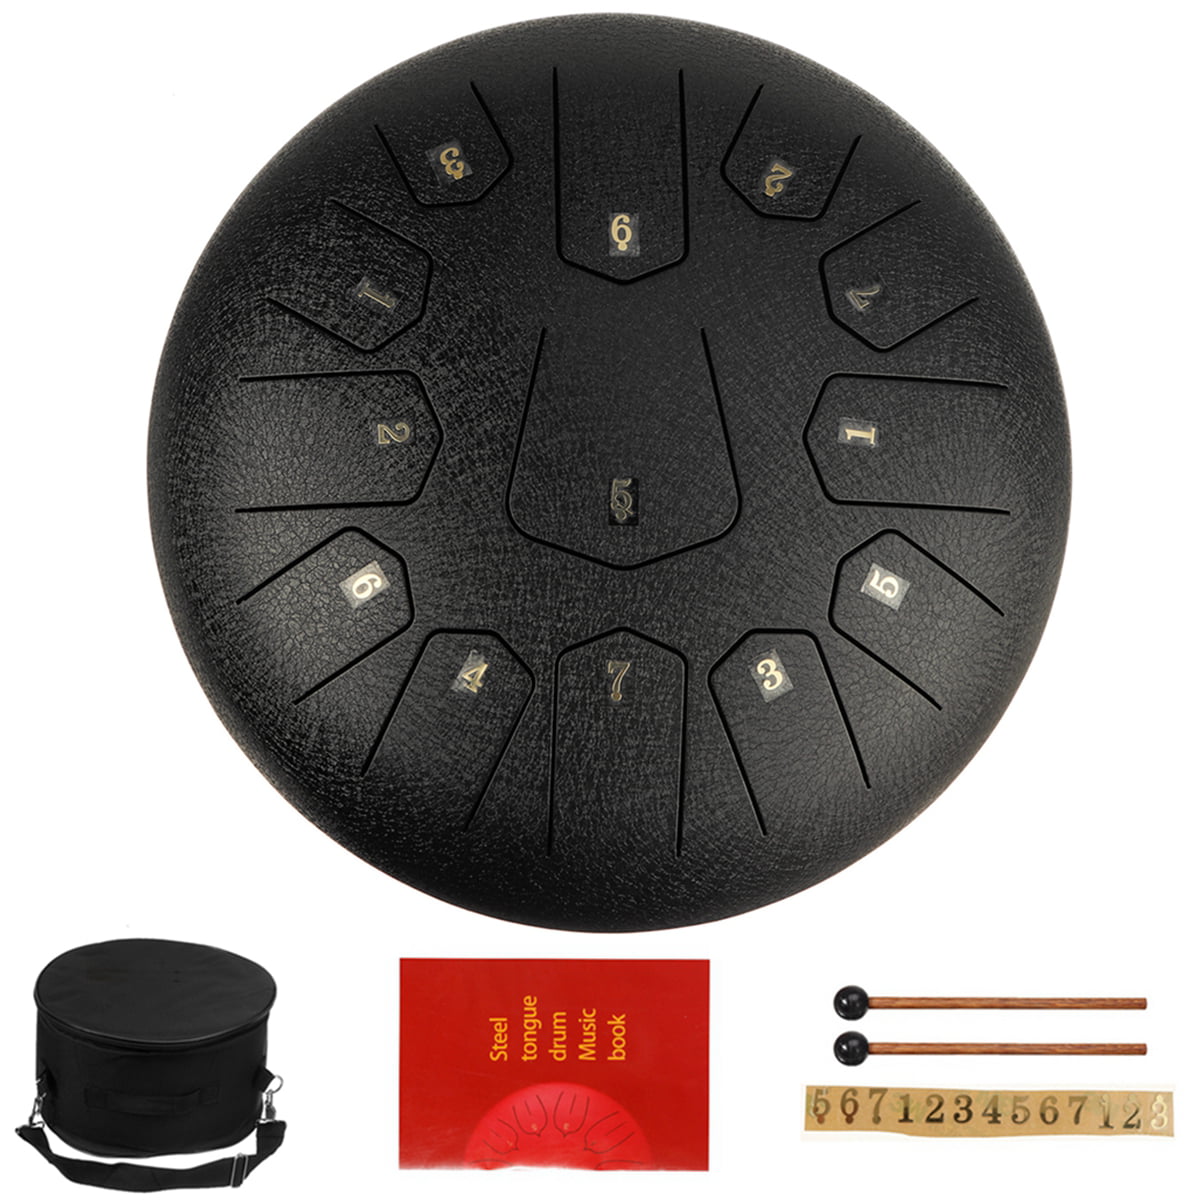 KUDOUT 12 inch Steel Tongue Drum C Major 13 Notes Handpan Steel Drum for Adults Kids Drum Percussion Instrument for Sound Healing,Meditation,Yoga,Includes Rubber Mallets,Finger Picks Carrying Bag